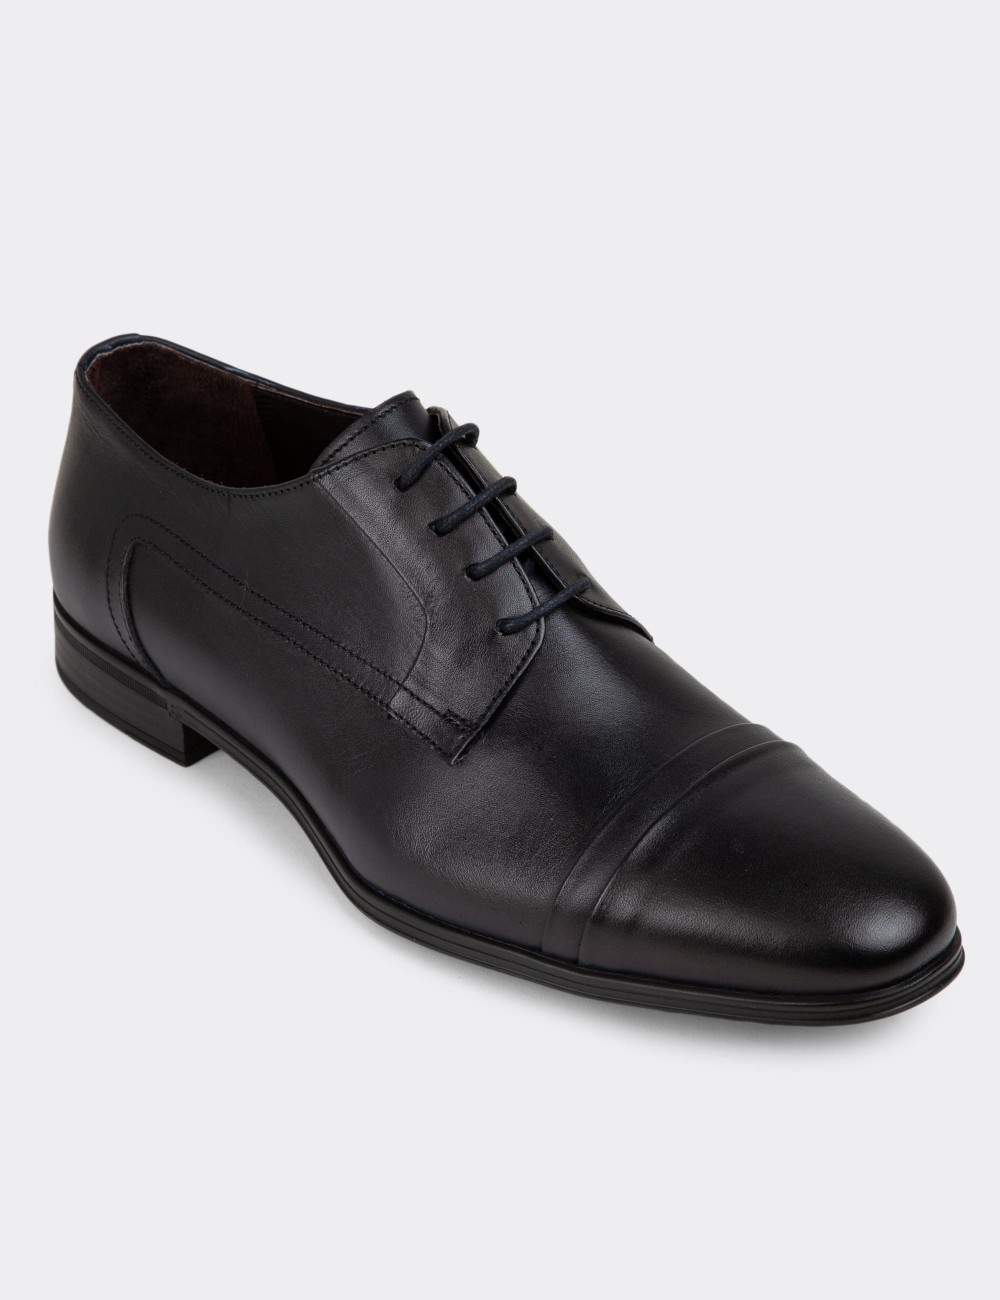 Navy Leather Classic Shoes - 01943MLCVC01